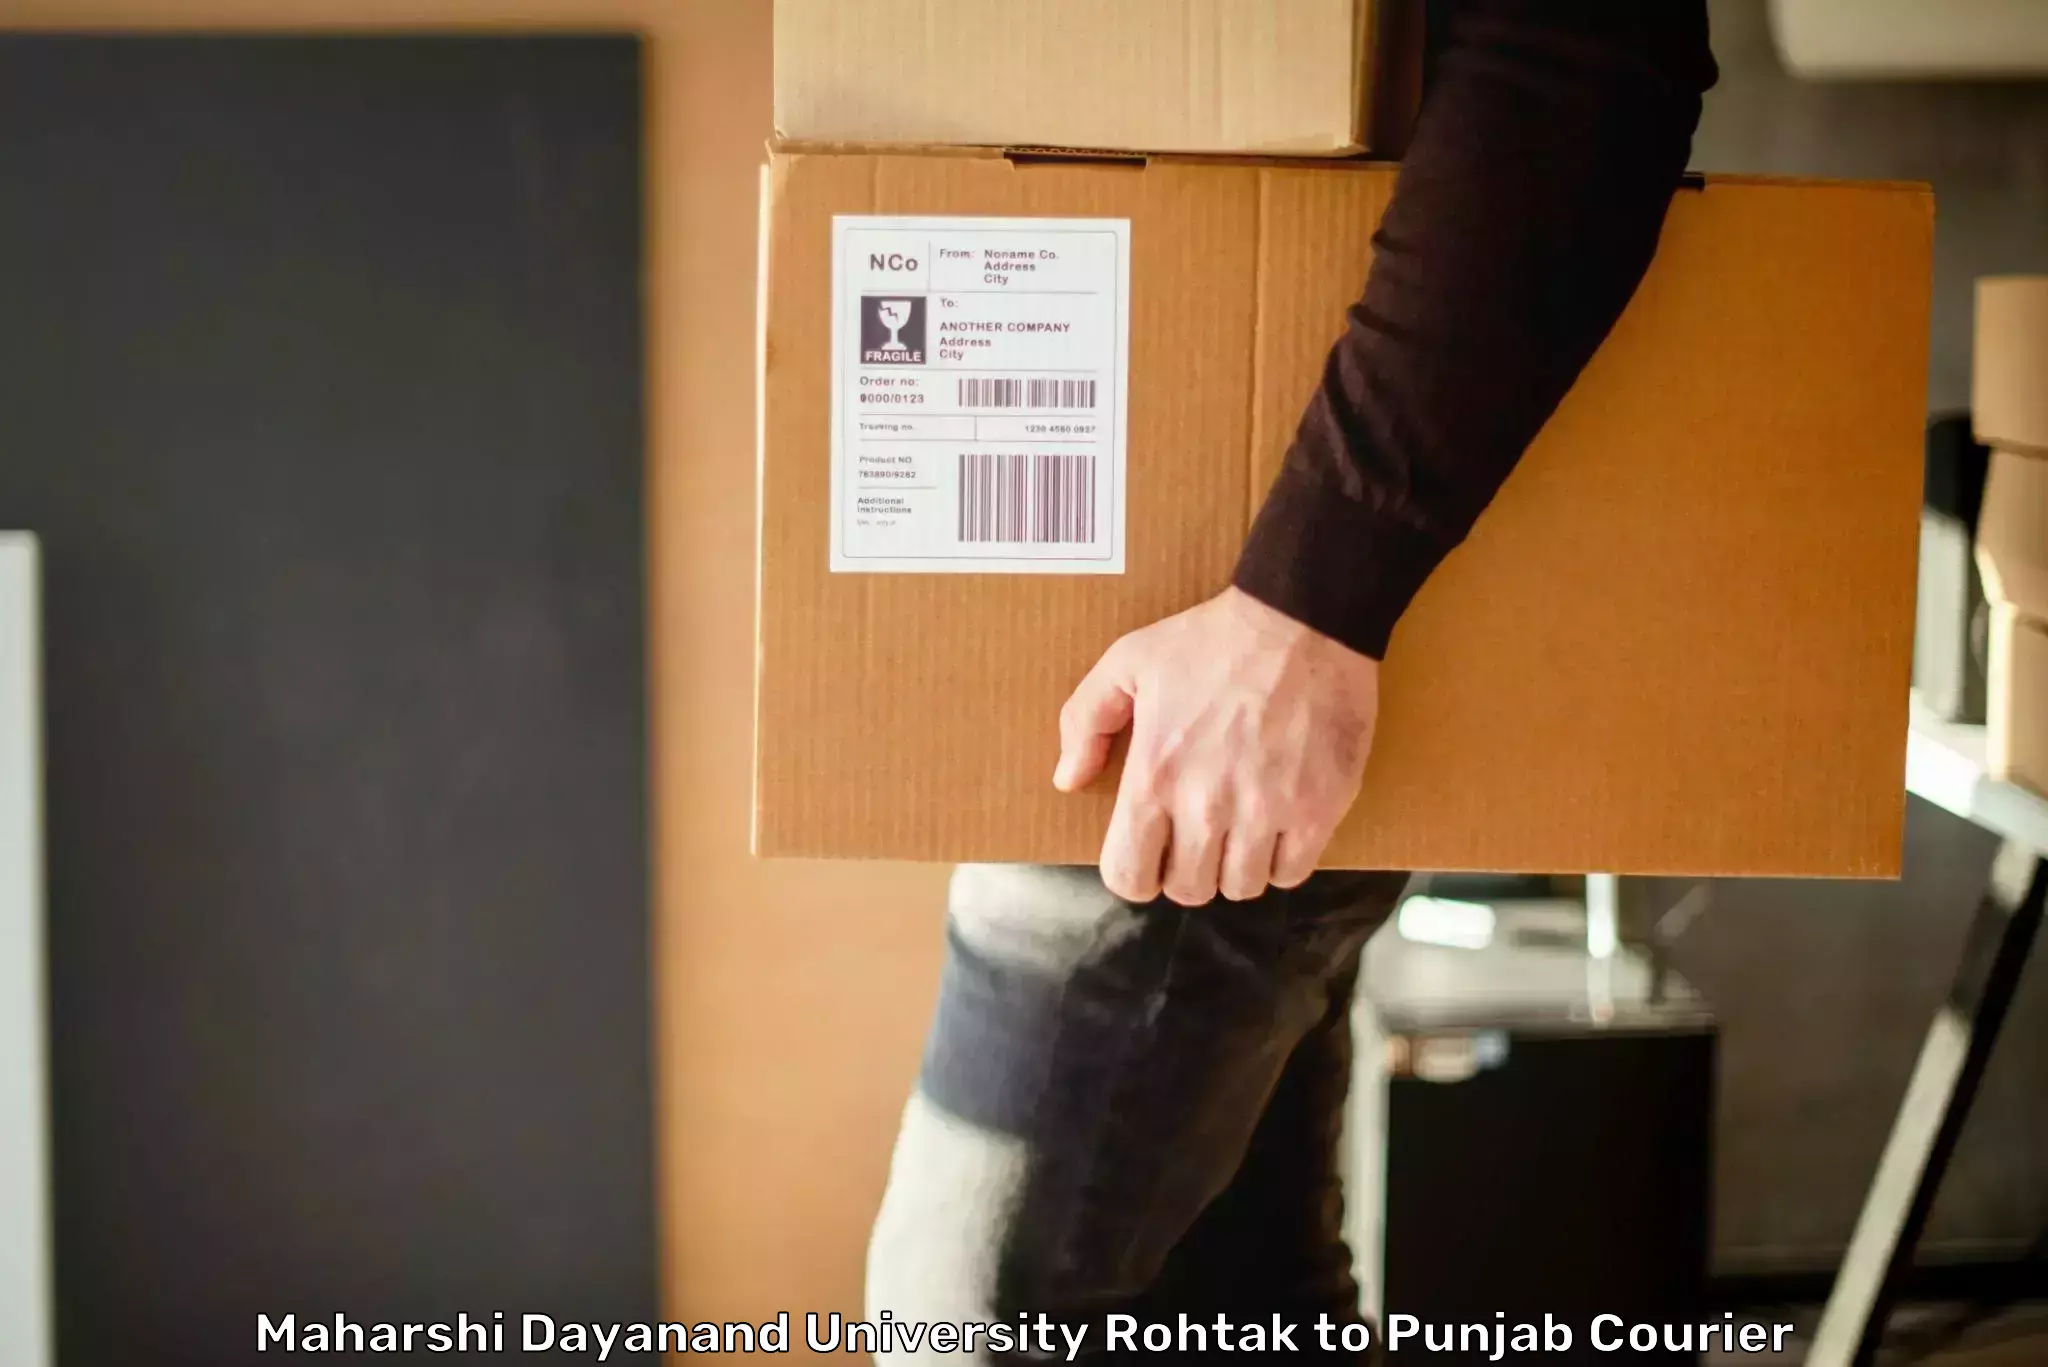 Easy access courier services Maharshi Dayanand University Rohtak to Punjab